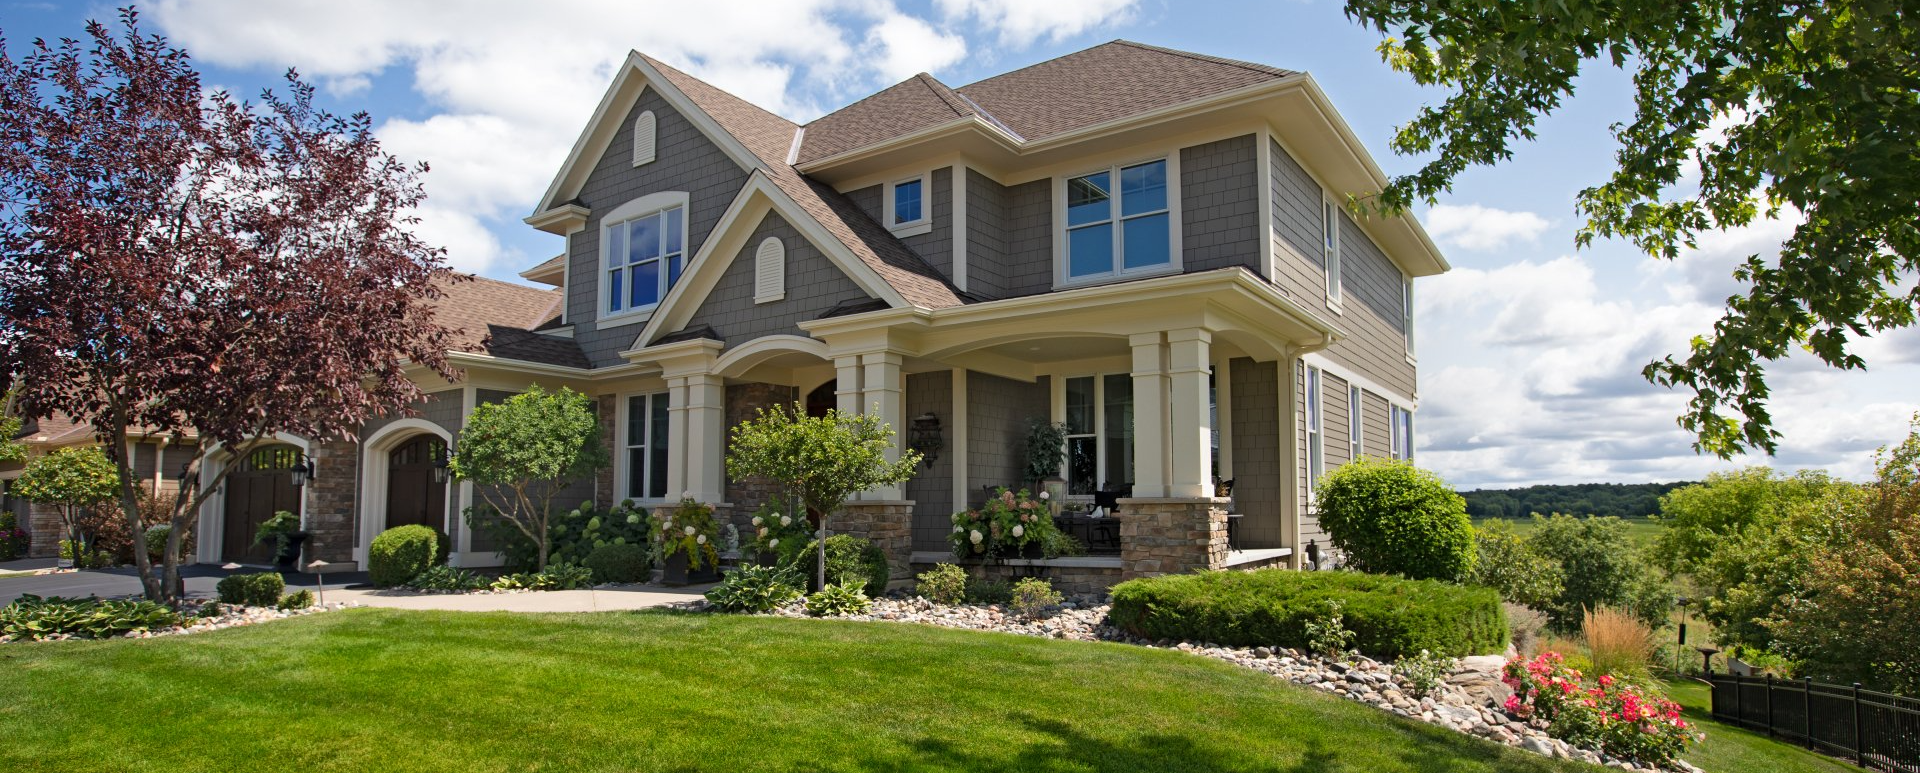 Two storey house — Tinley Park, IL — Master Home Inspectors